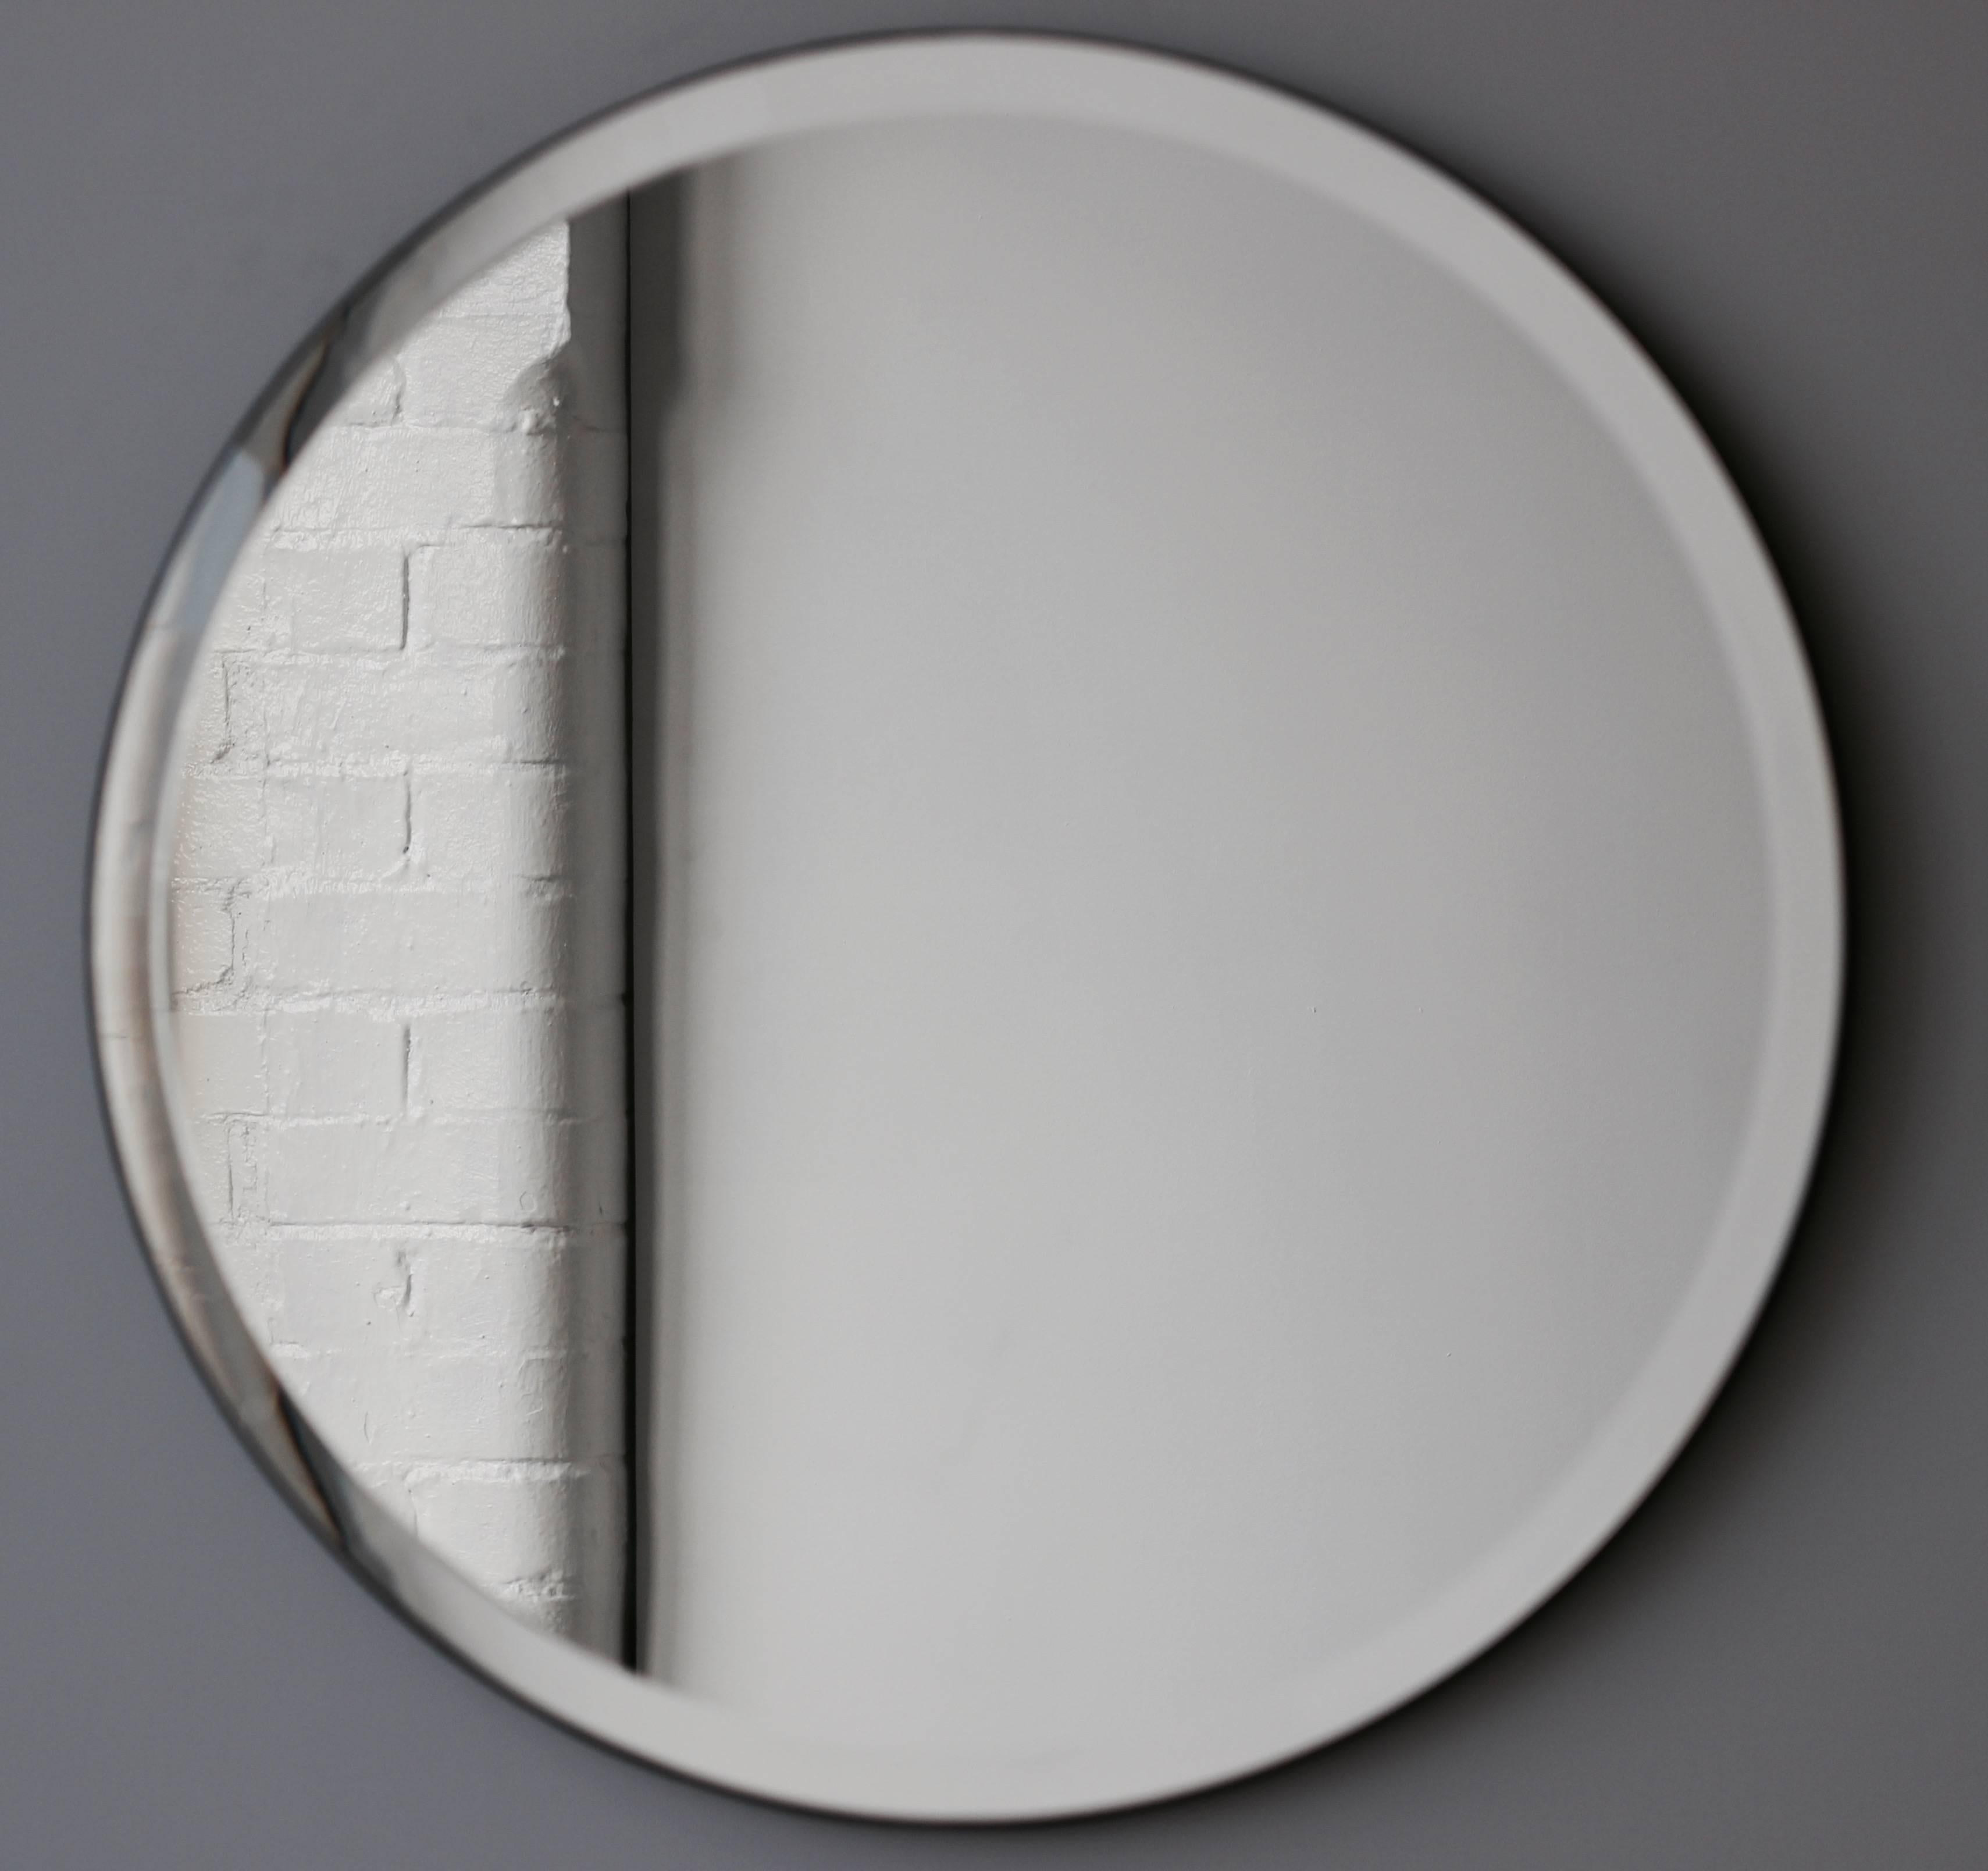 The images in this bespoke listing do not represent the approved modifications, and they refer to a standard size of the suspended Capsula™ mirror with a brushed brass frame. All specifications for this particular listing are as detailed in the